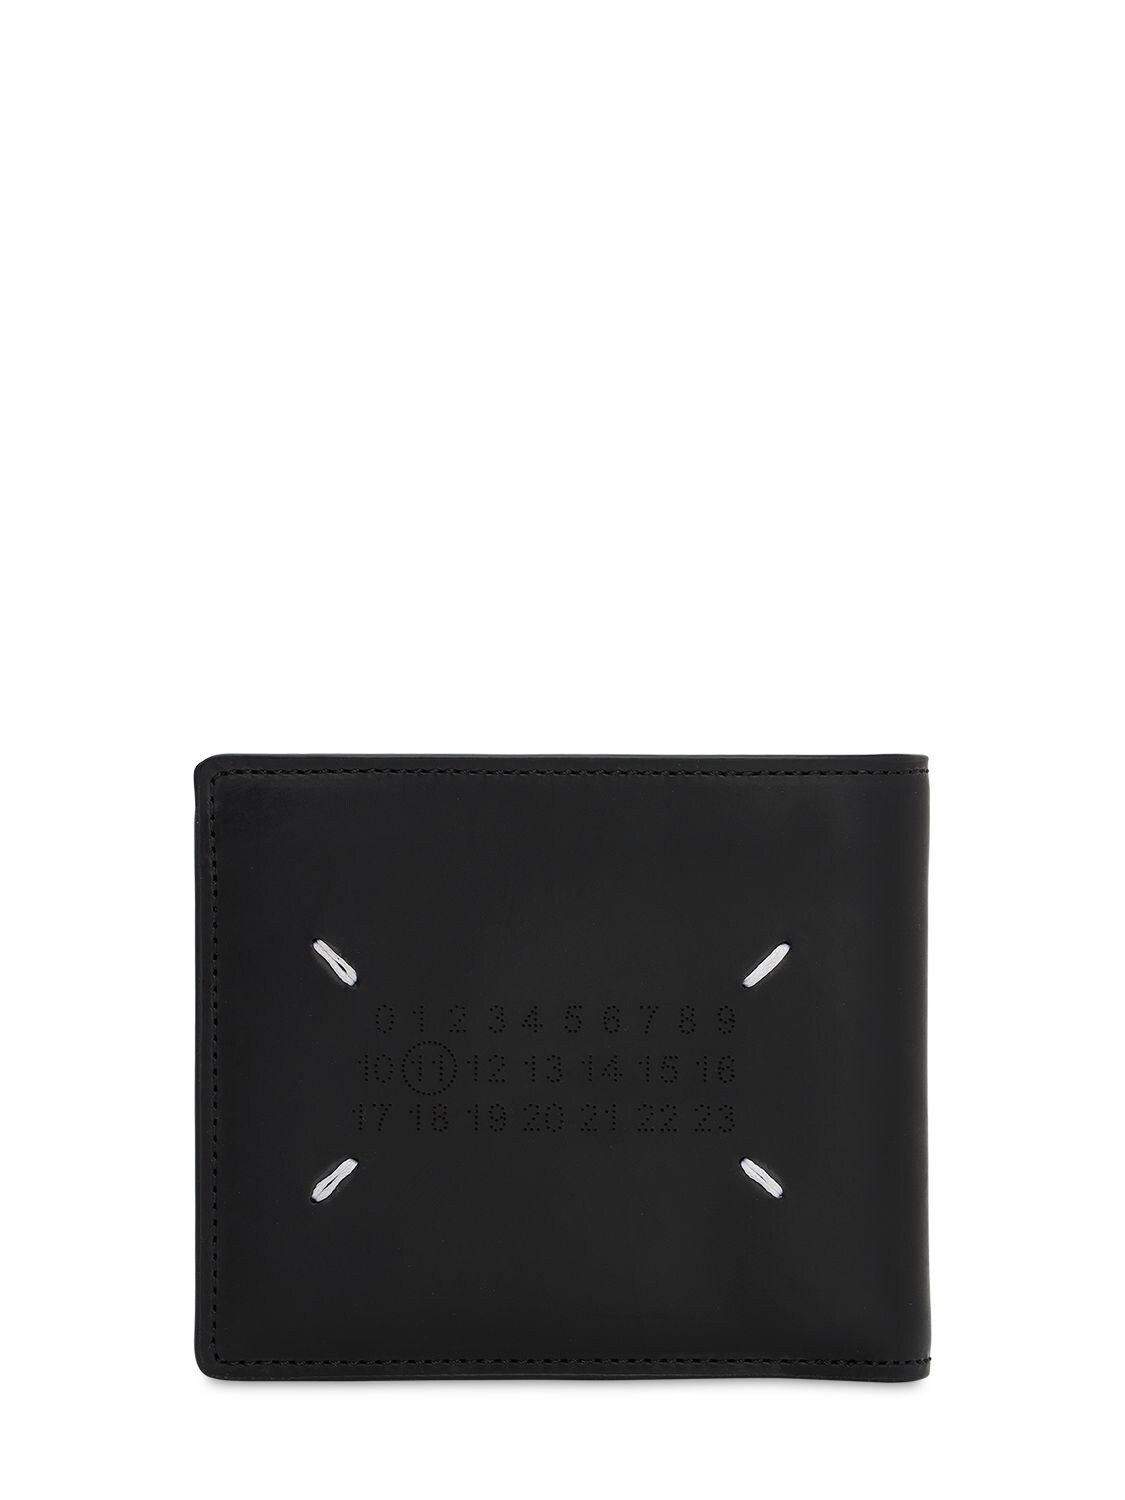 Maison Margiela Perforated Logo Leather Billfold Wallet In Black